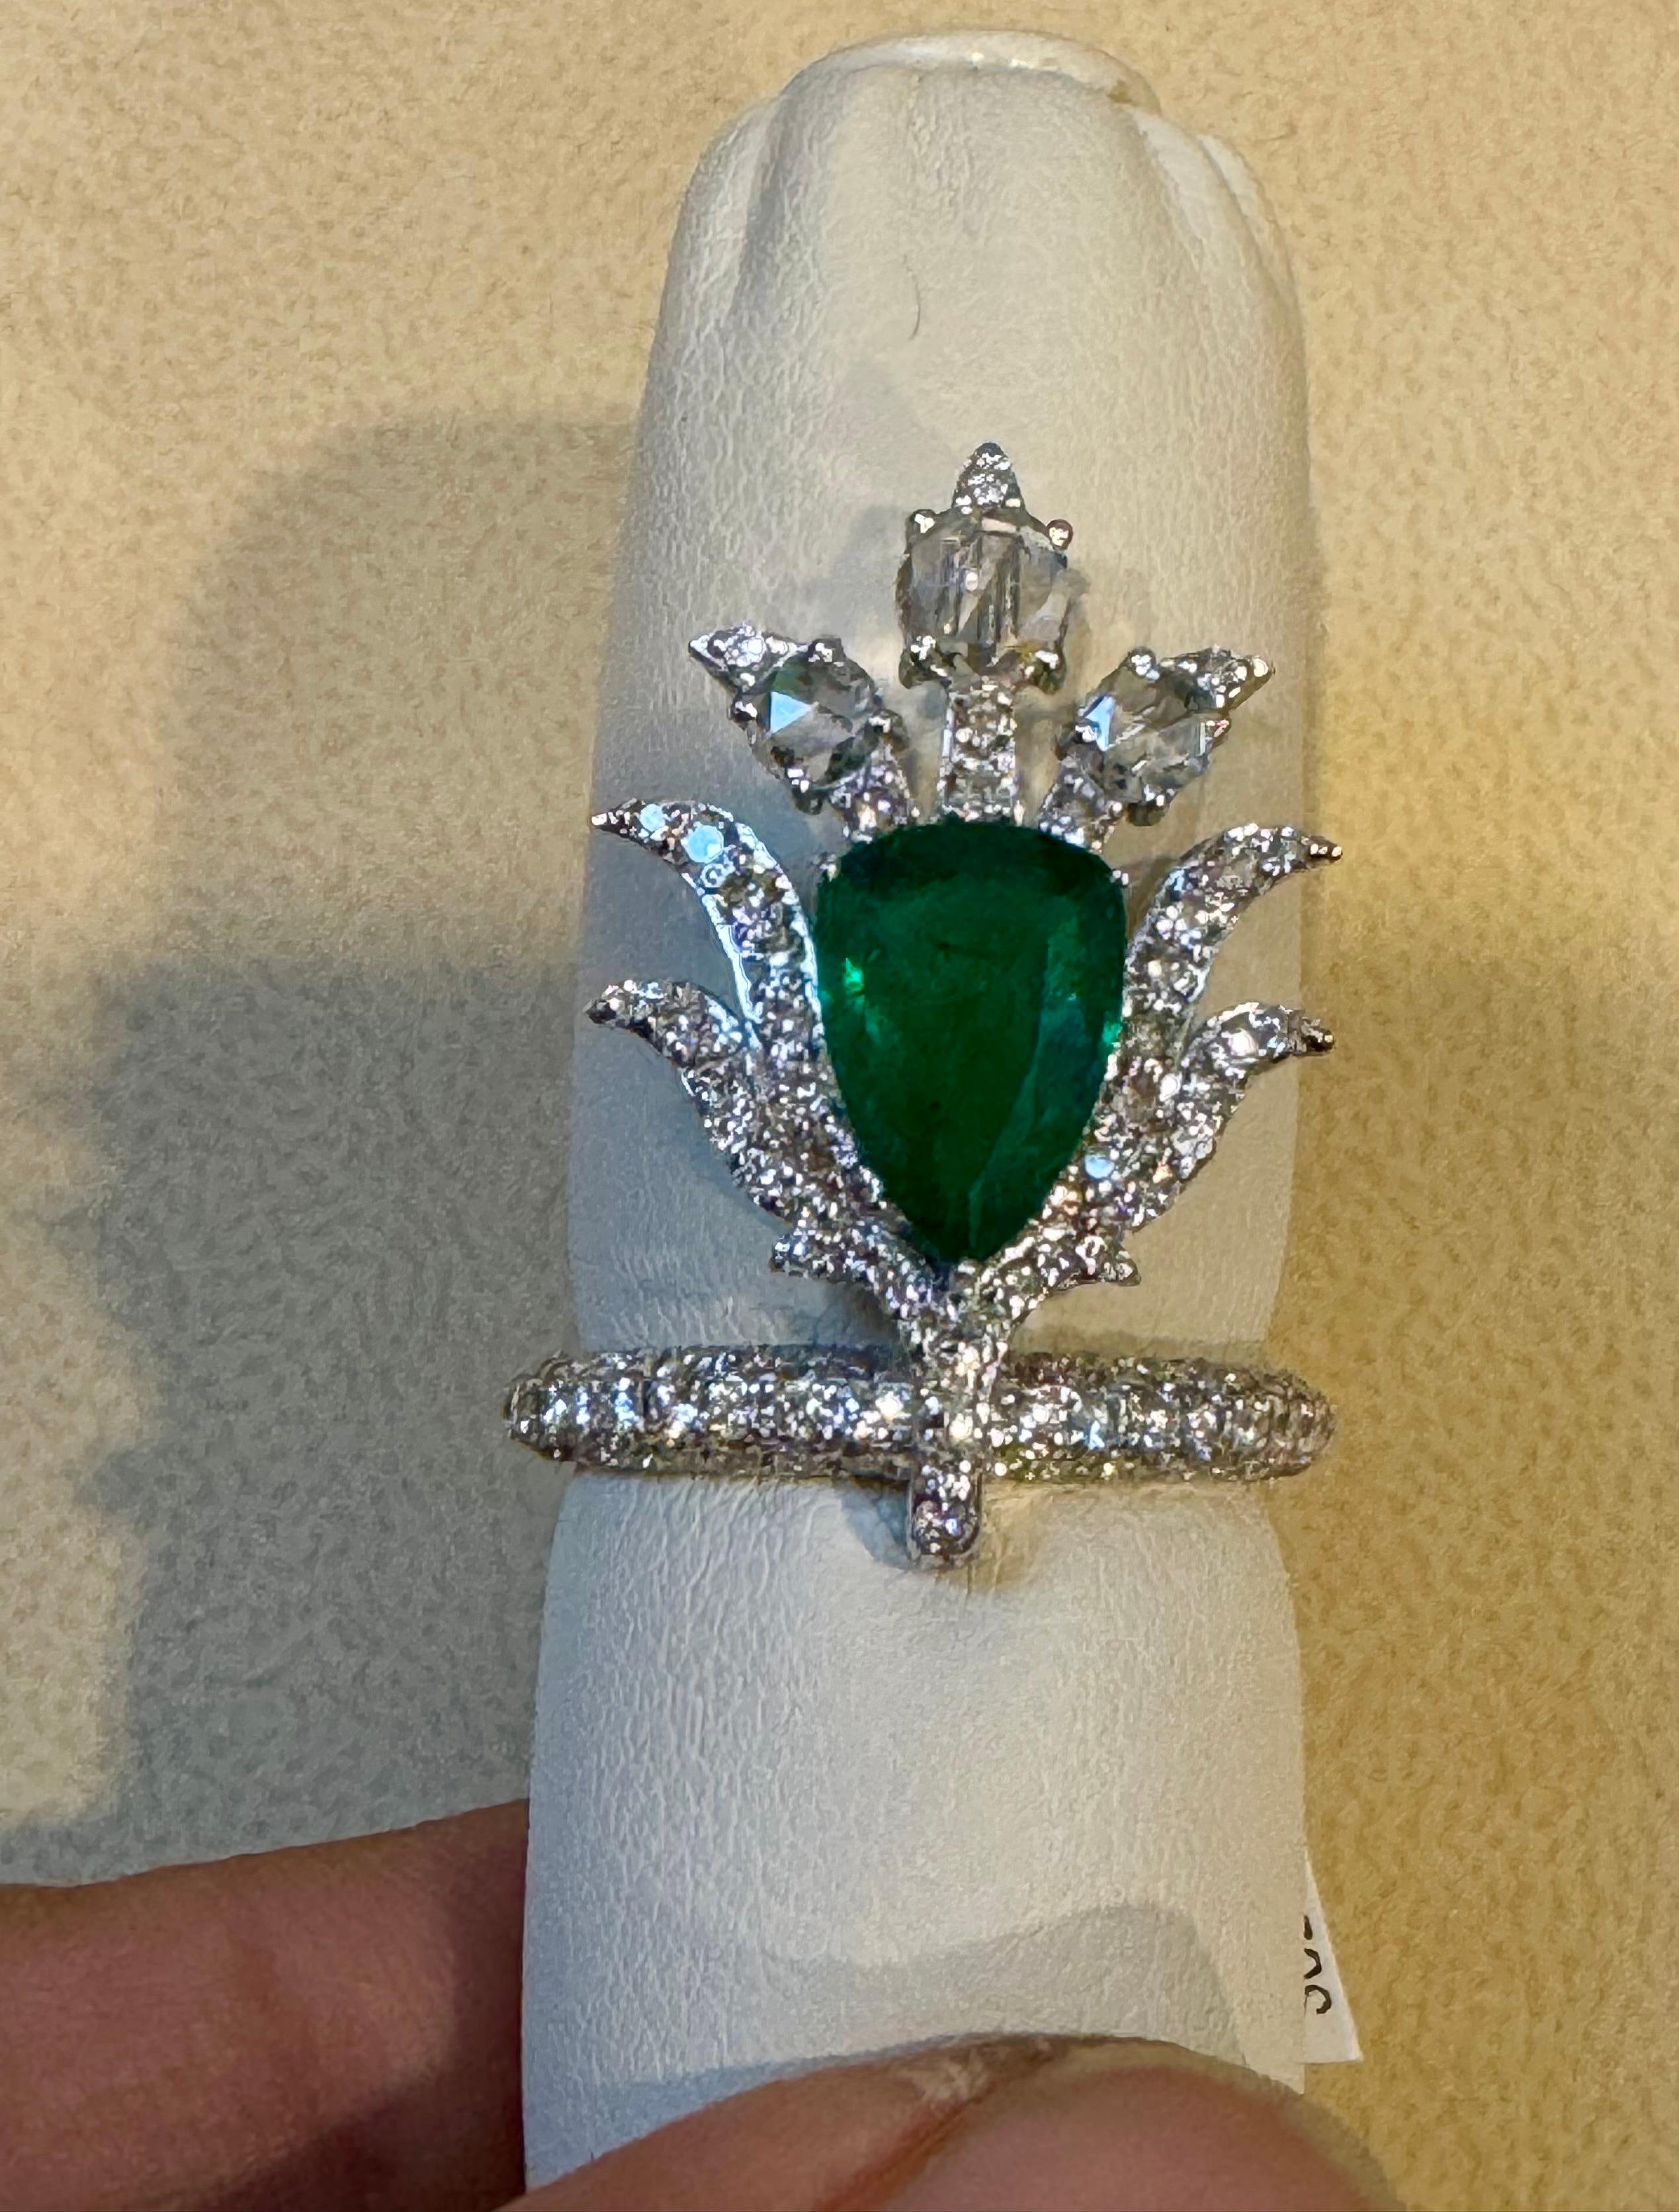 2 Ct Finest Zambian Pear Emerald & 2 Ct Diamond Ring in 18 Kt Gold Size 7 For Sale 7